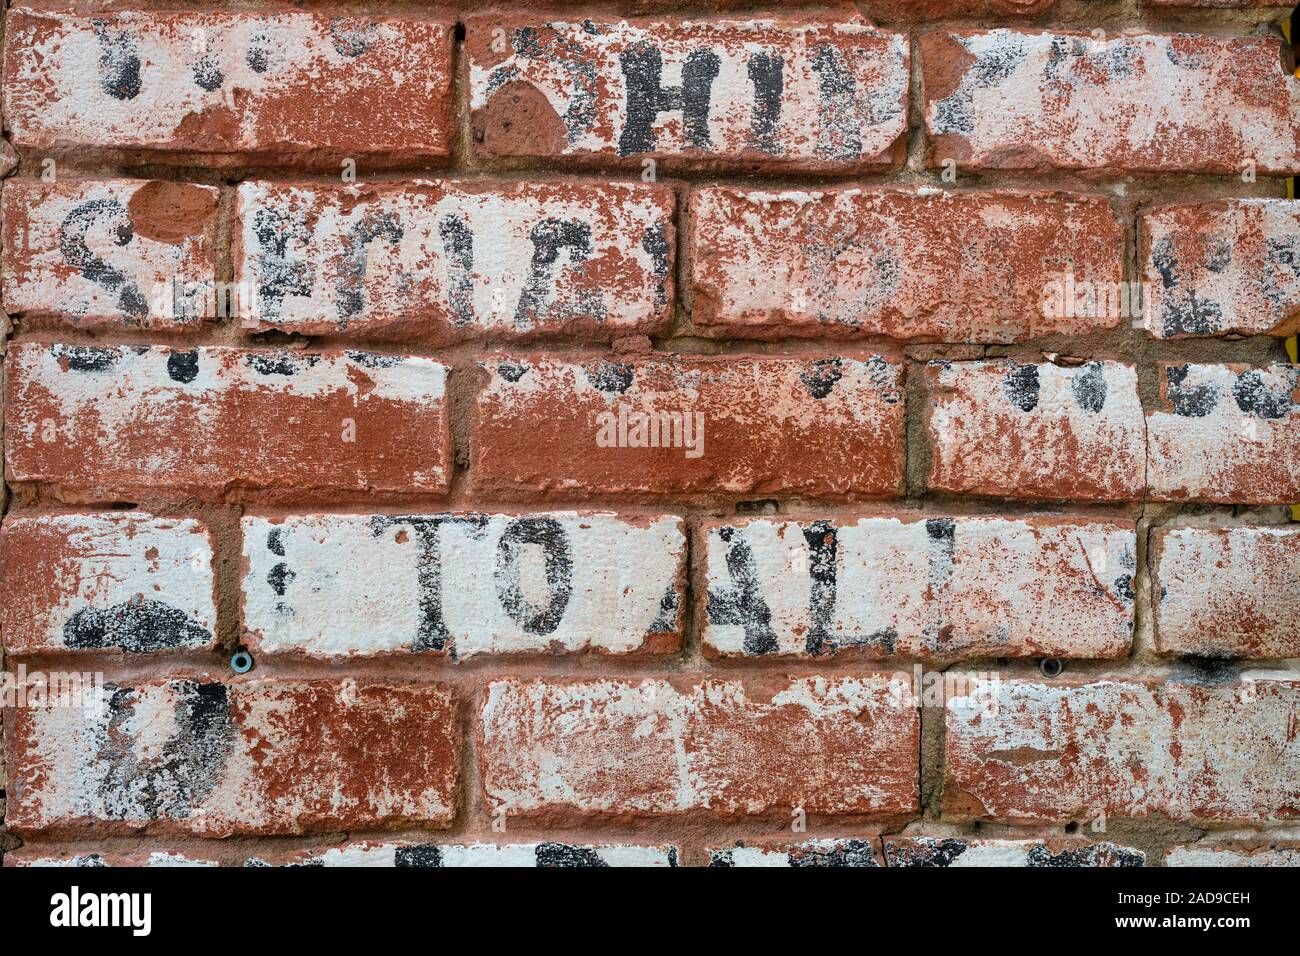 Brick wall with words. Stock Photo